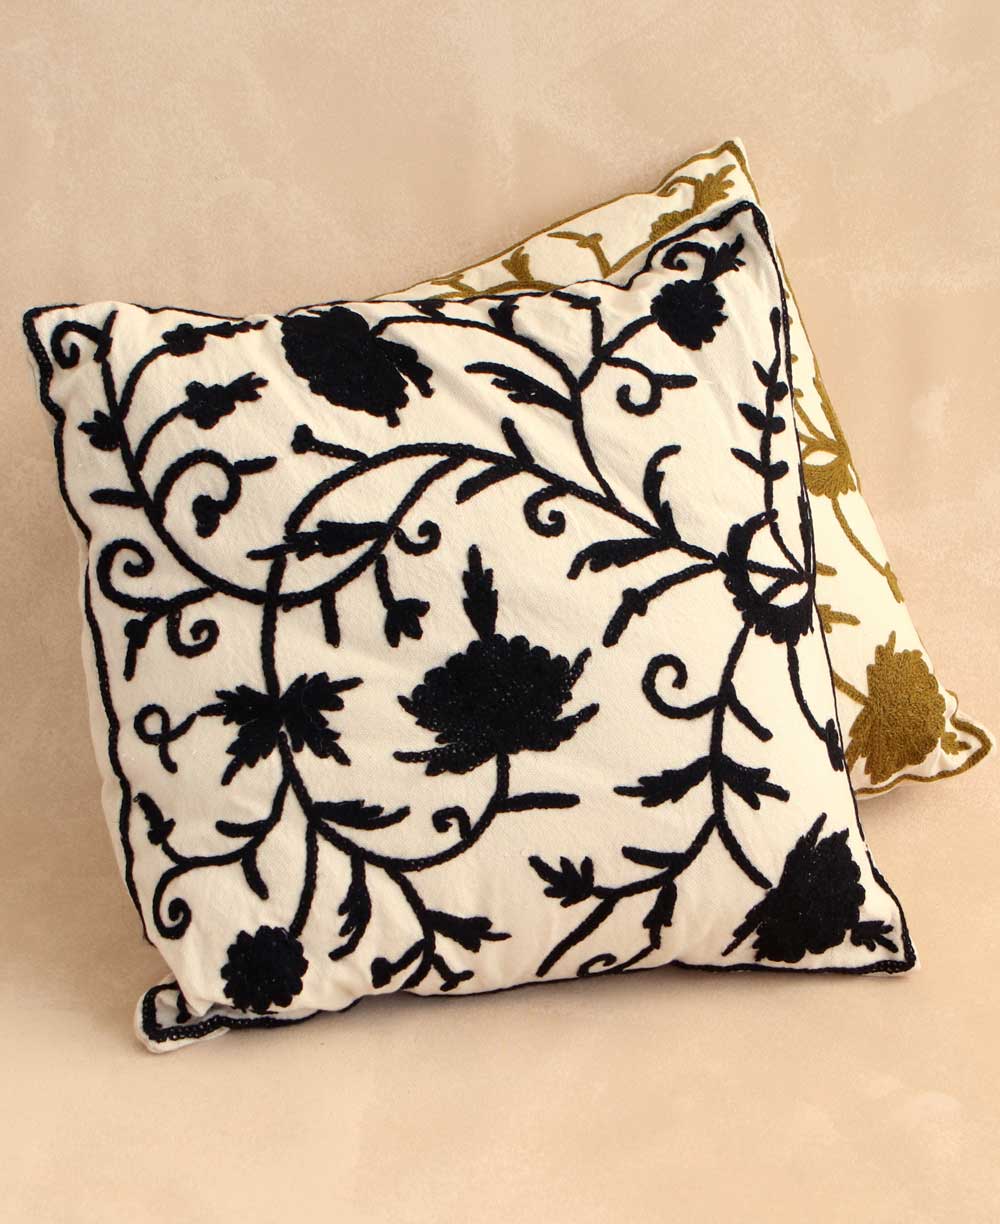 Cream Cotton Tufted Lumbar Pillow with Gold Embroidery